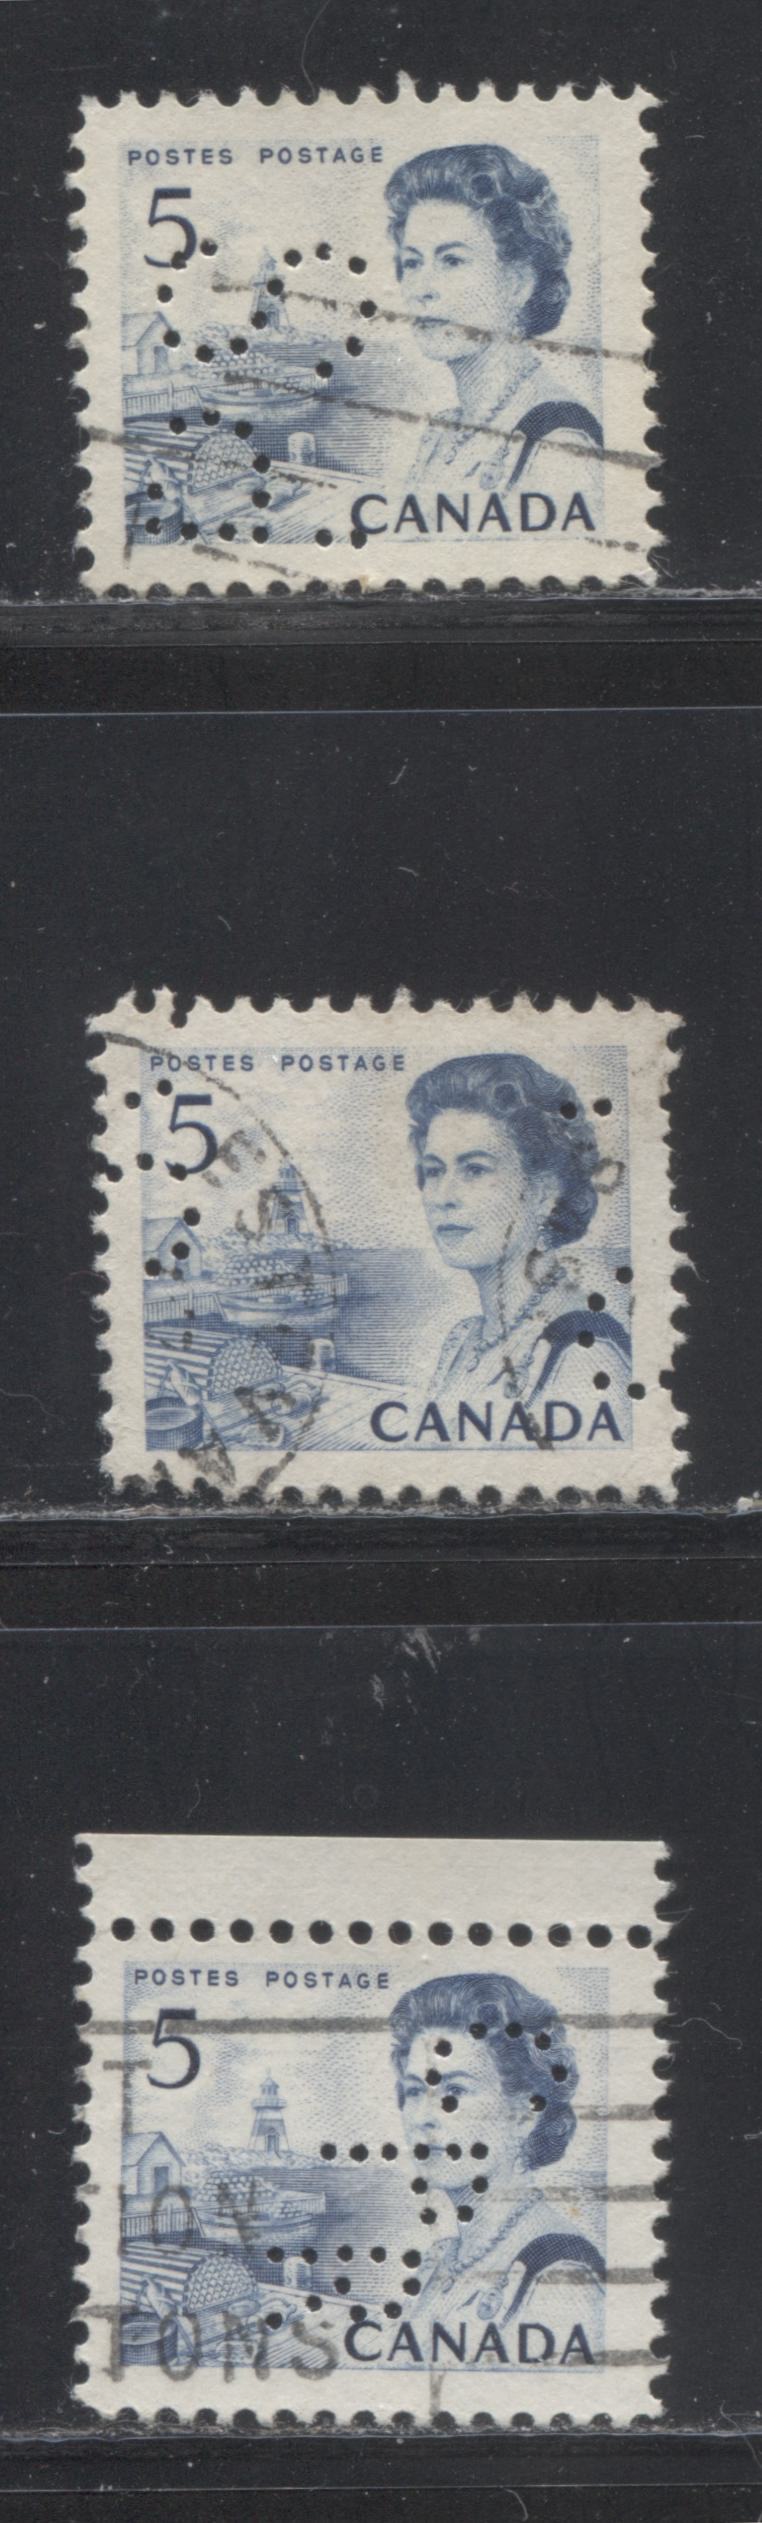 Lot 277 Canada #458 5c Blue Fishing Village, 1967-1973 Centennial Definitive Issue, 3 VF Used Singles With Different Perforated Initials